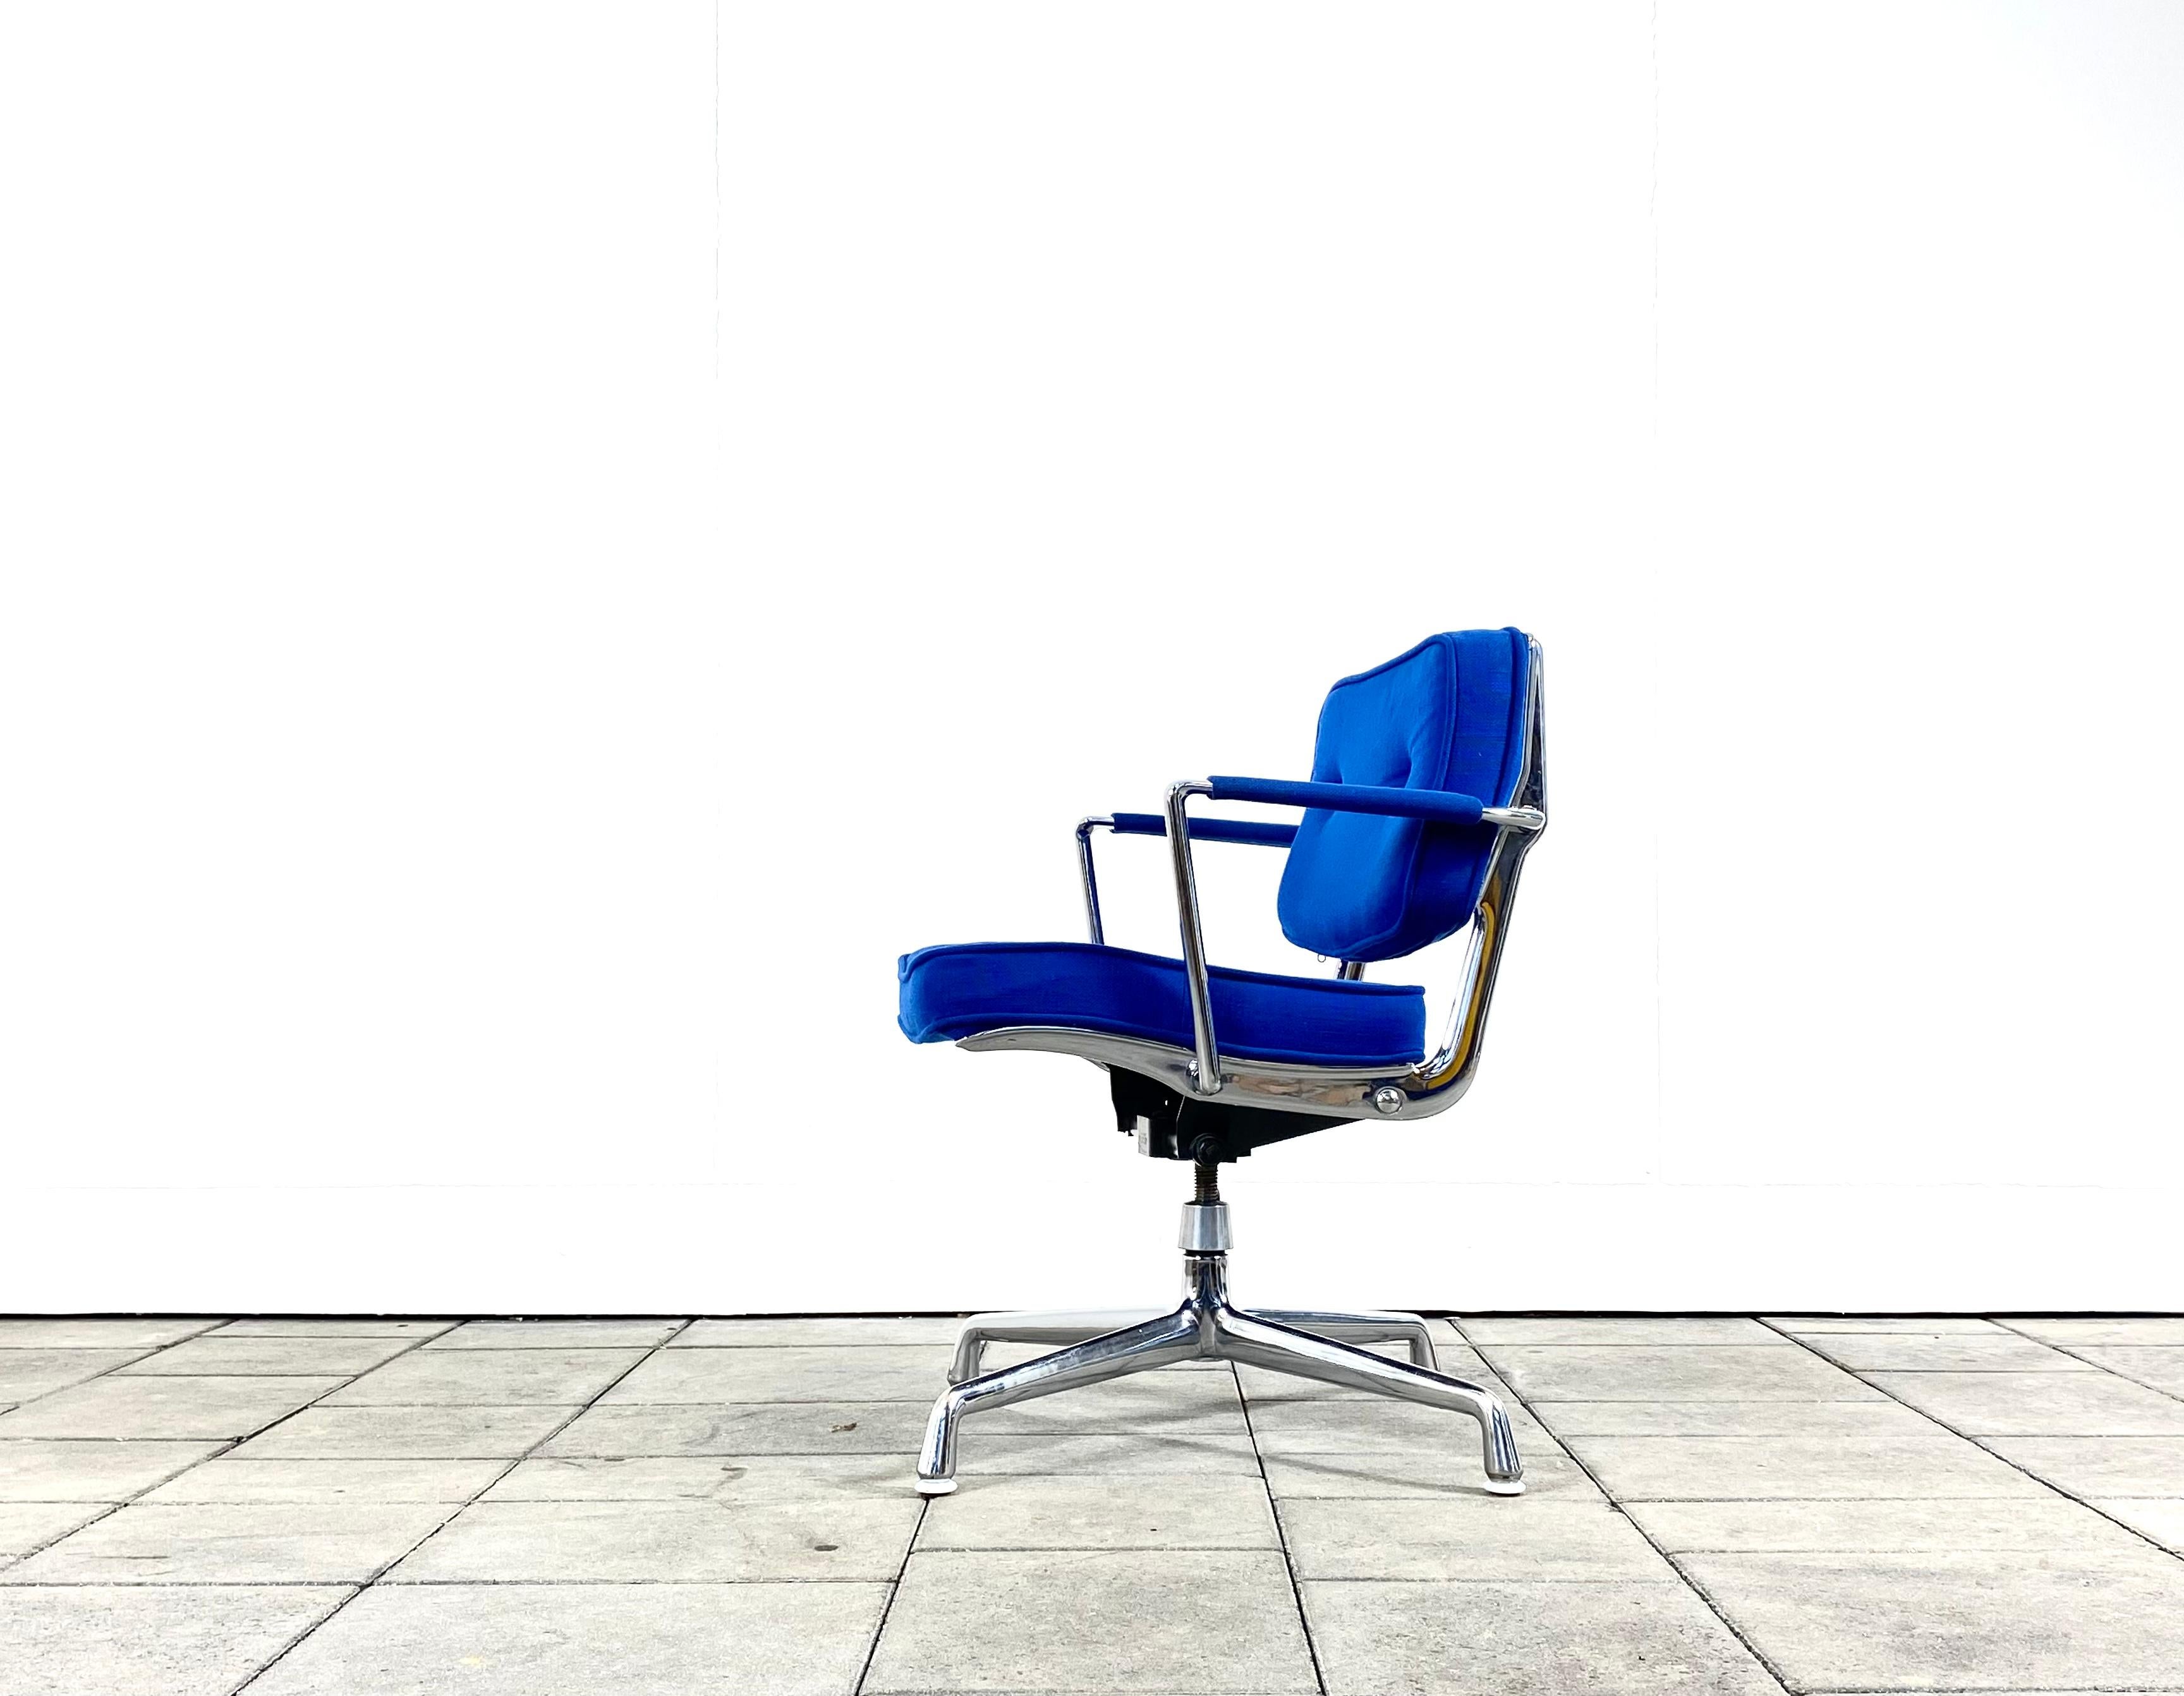 rare Herman Miller ES102 Intermediate Desk chair designed by Charles & Ray Eames

Upholstery in blue Hopsack fabric, with chromed aluminium parts, equipped with shivel & tilt function, height adjustable.

The chair is in very good vintage